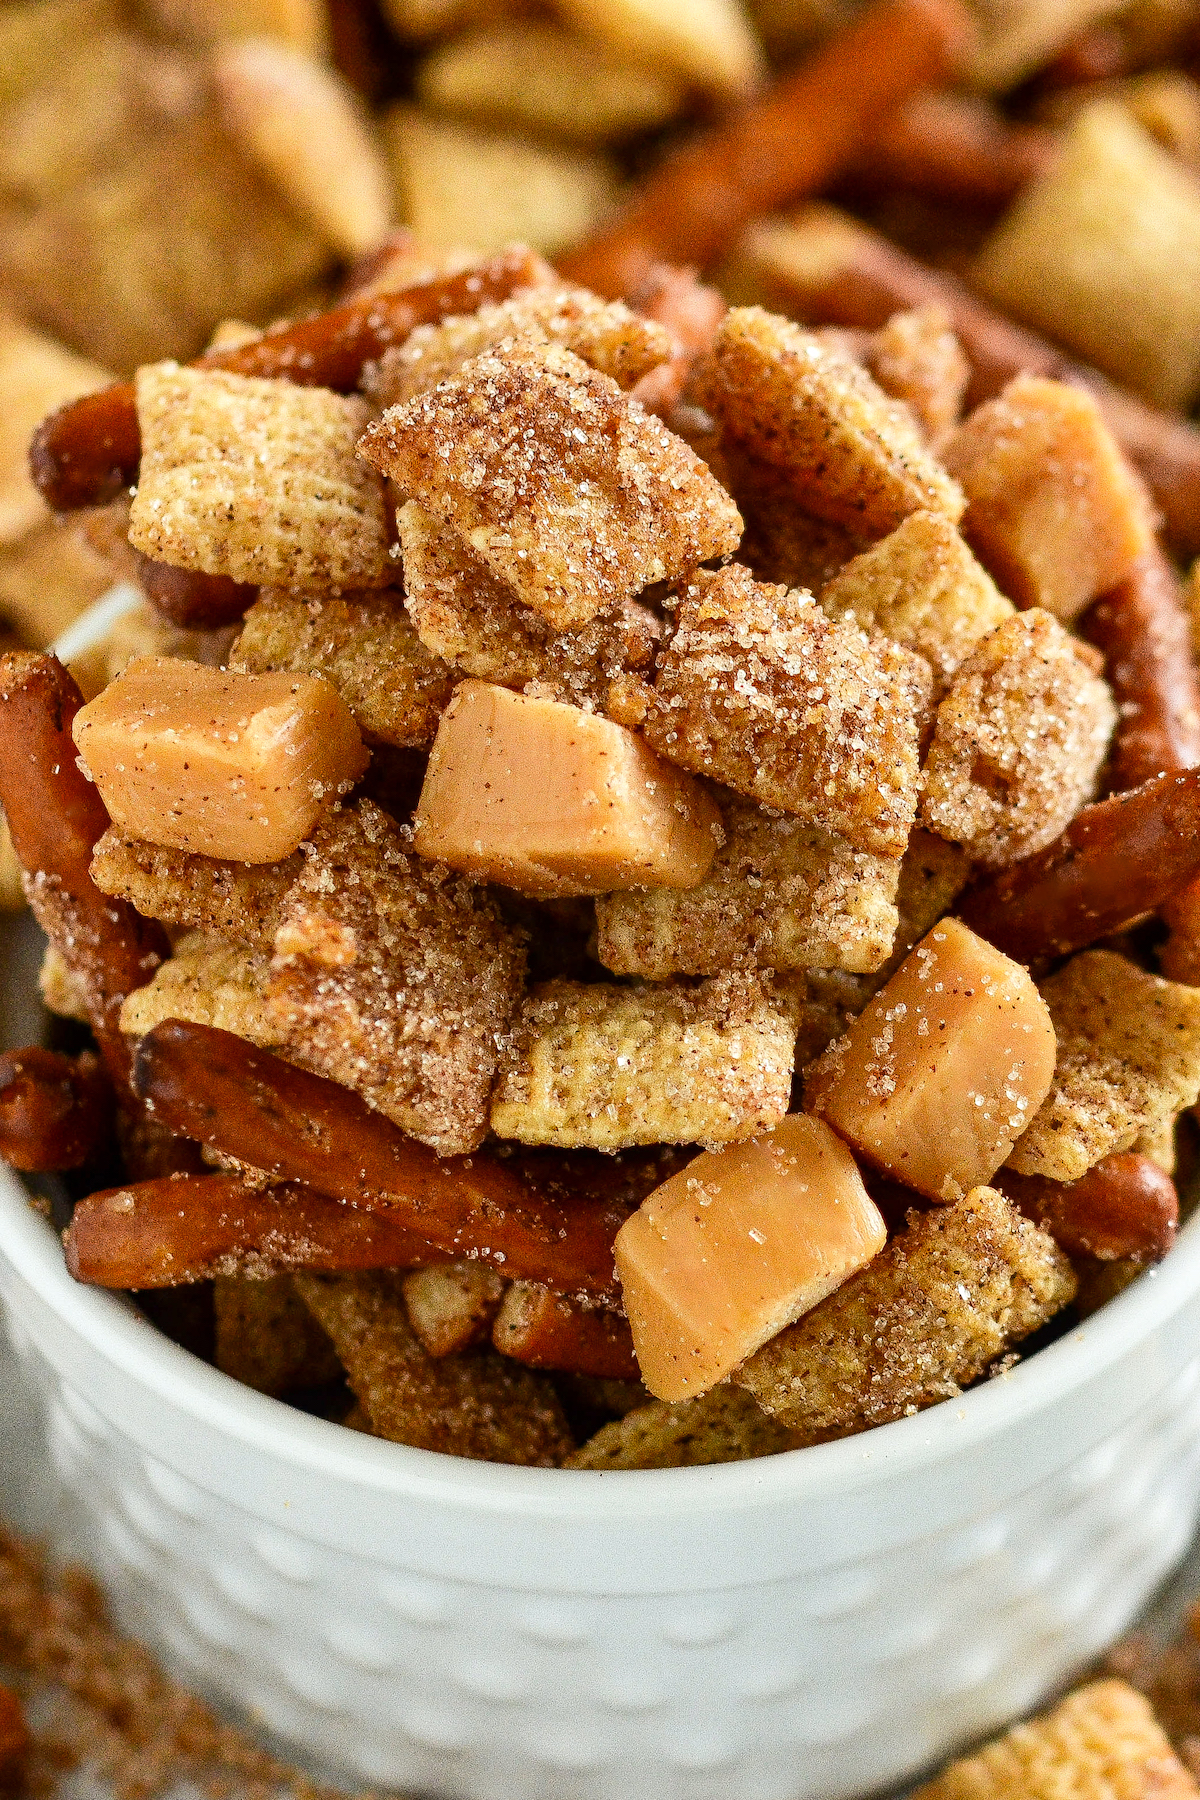 A bowl of churro Chex mix with pretzels and caramel squares.